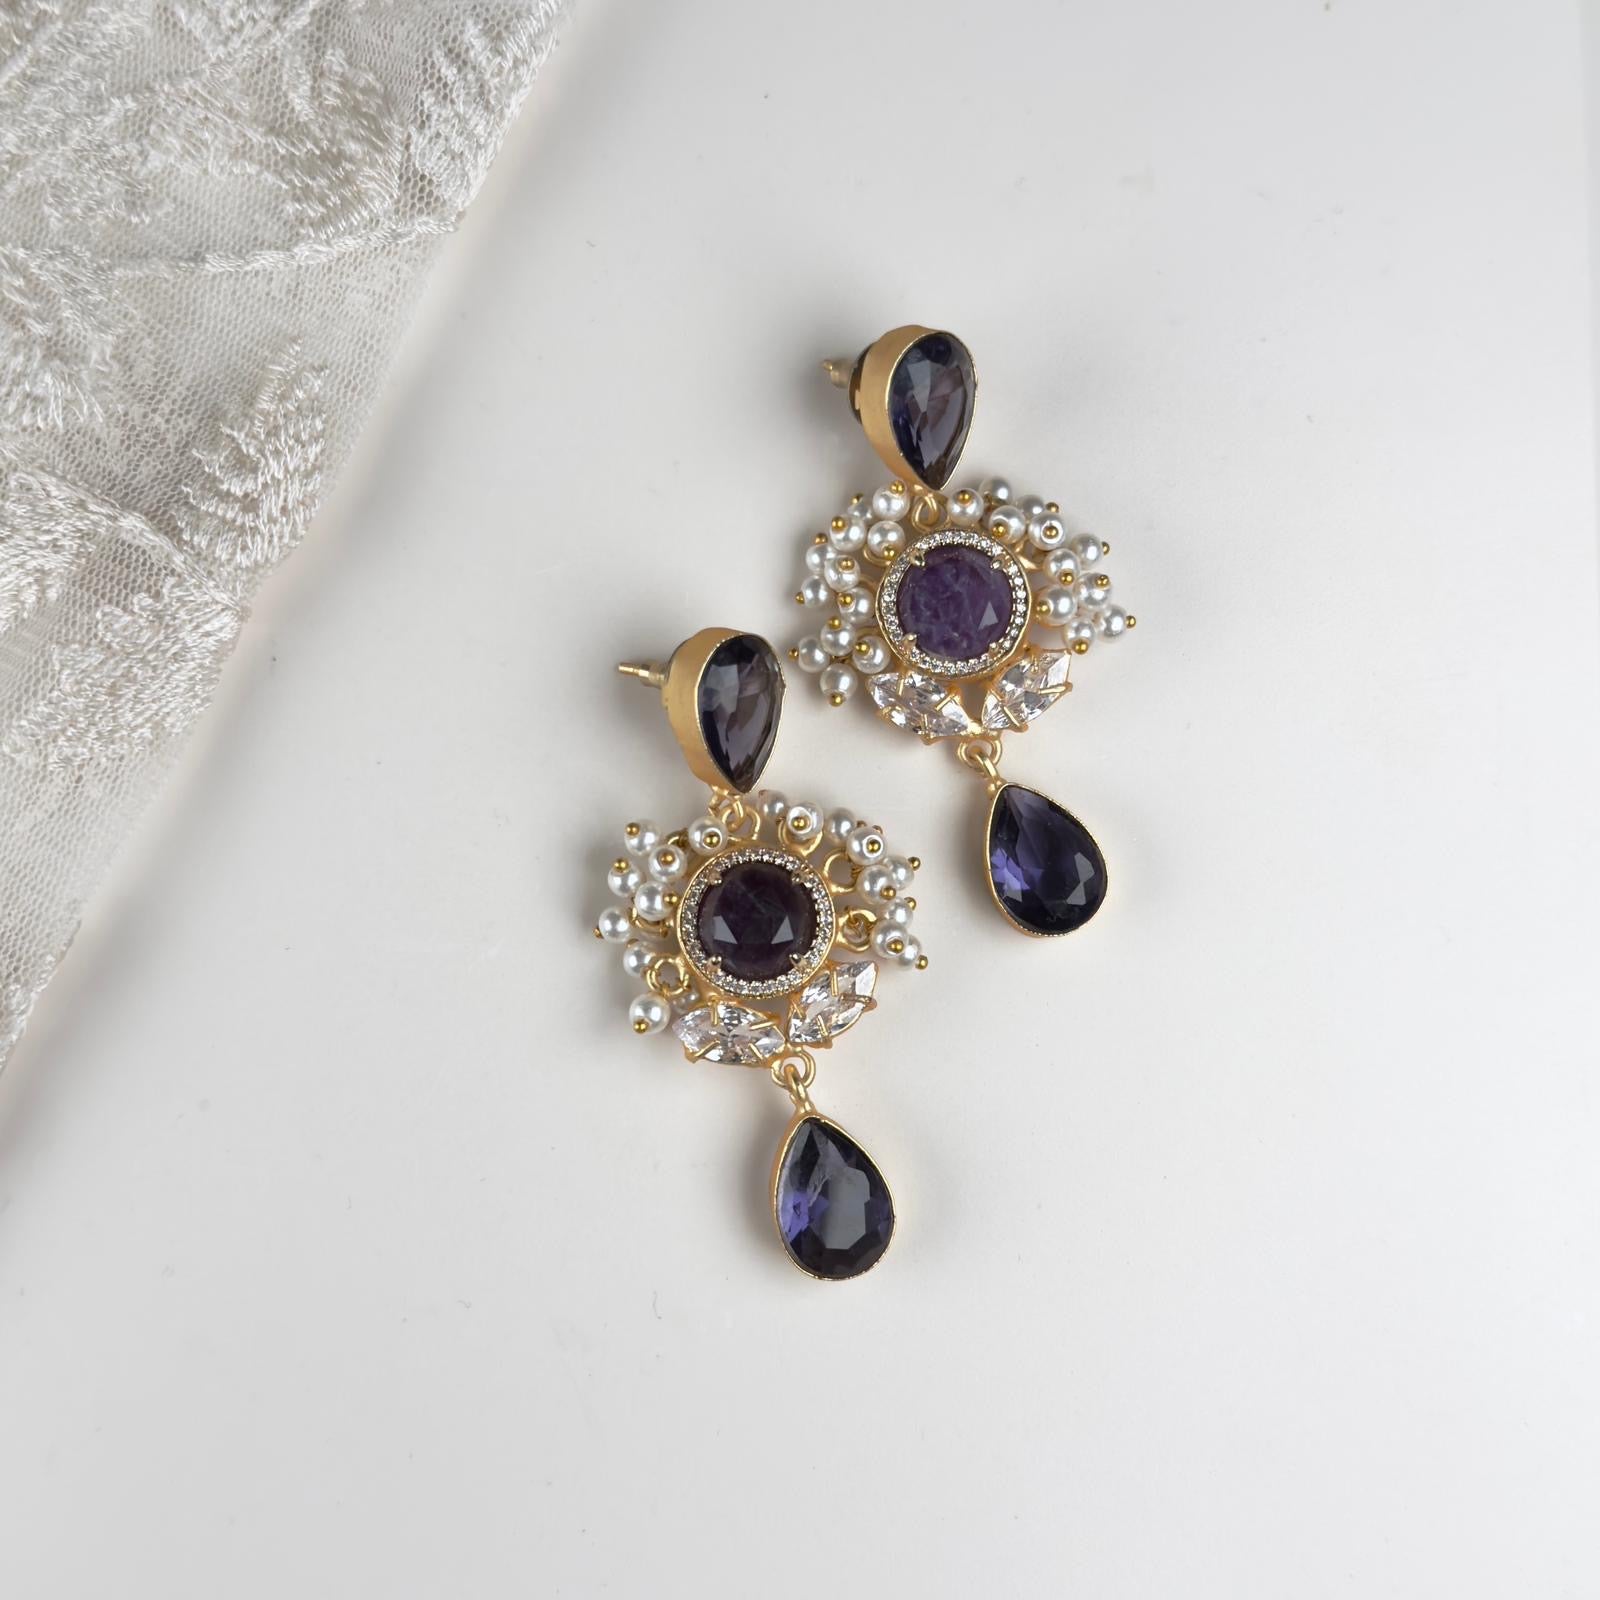 "Get ready to sparkle with these hand-cut gemstone Purple Drop Earrings! The cz crystals add a touch of shine to any outfit, making these earrings the perfect addition to your jewelry collection. Show off your unique style with these playful, yet elegant, earrings.&nbsp;